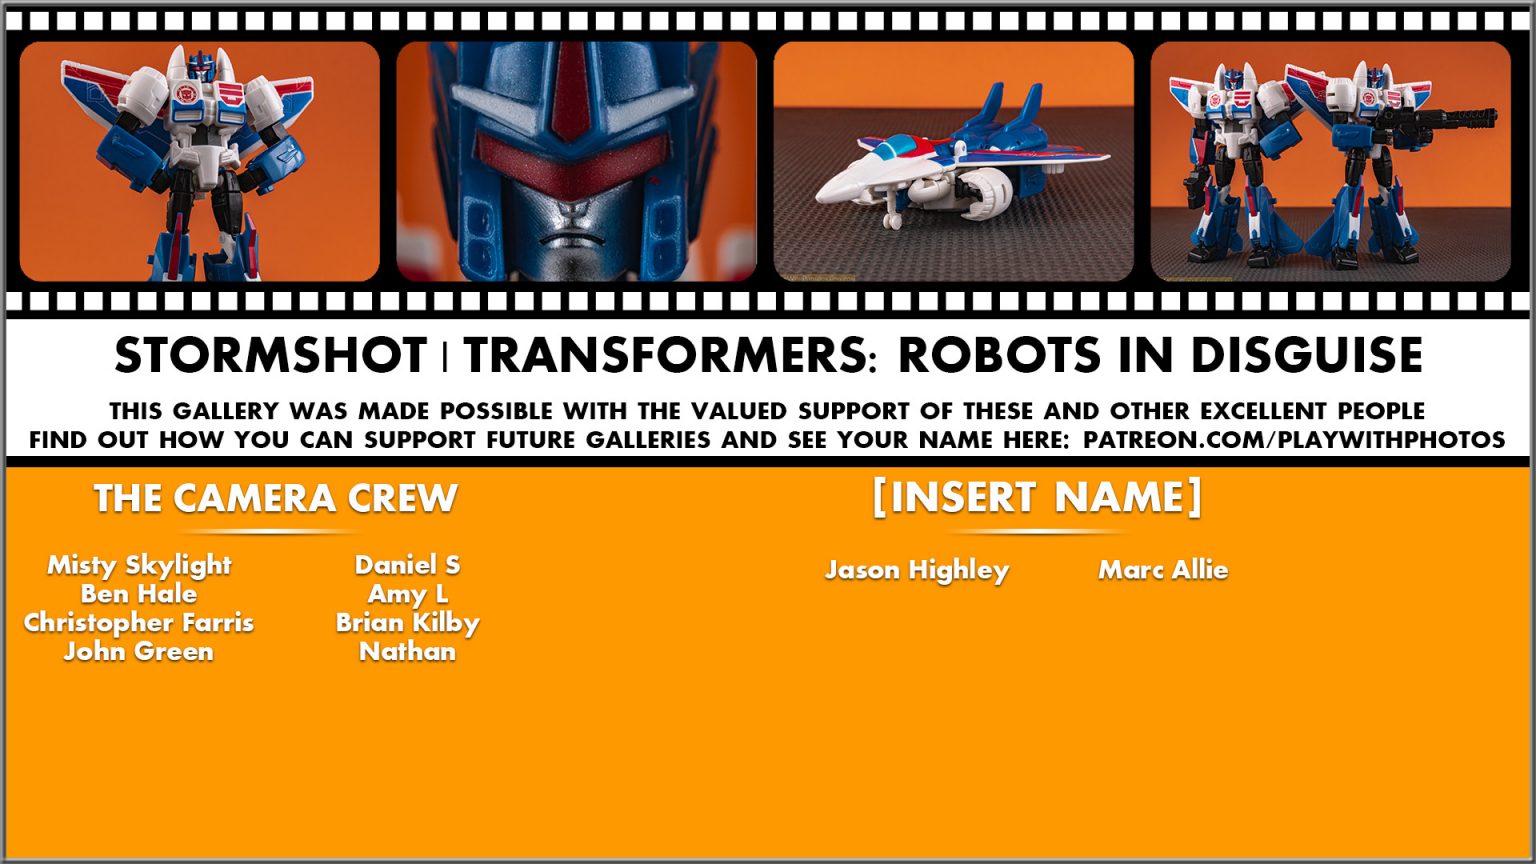 Transformers Robots in Disguise stormshot